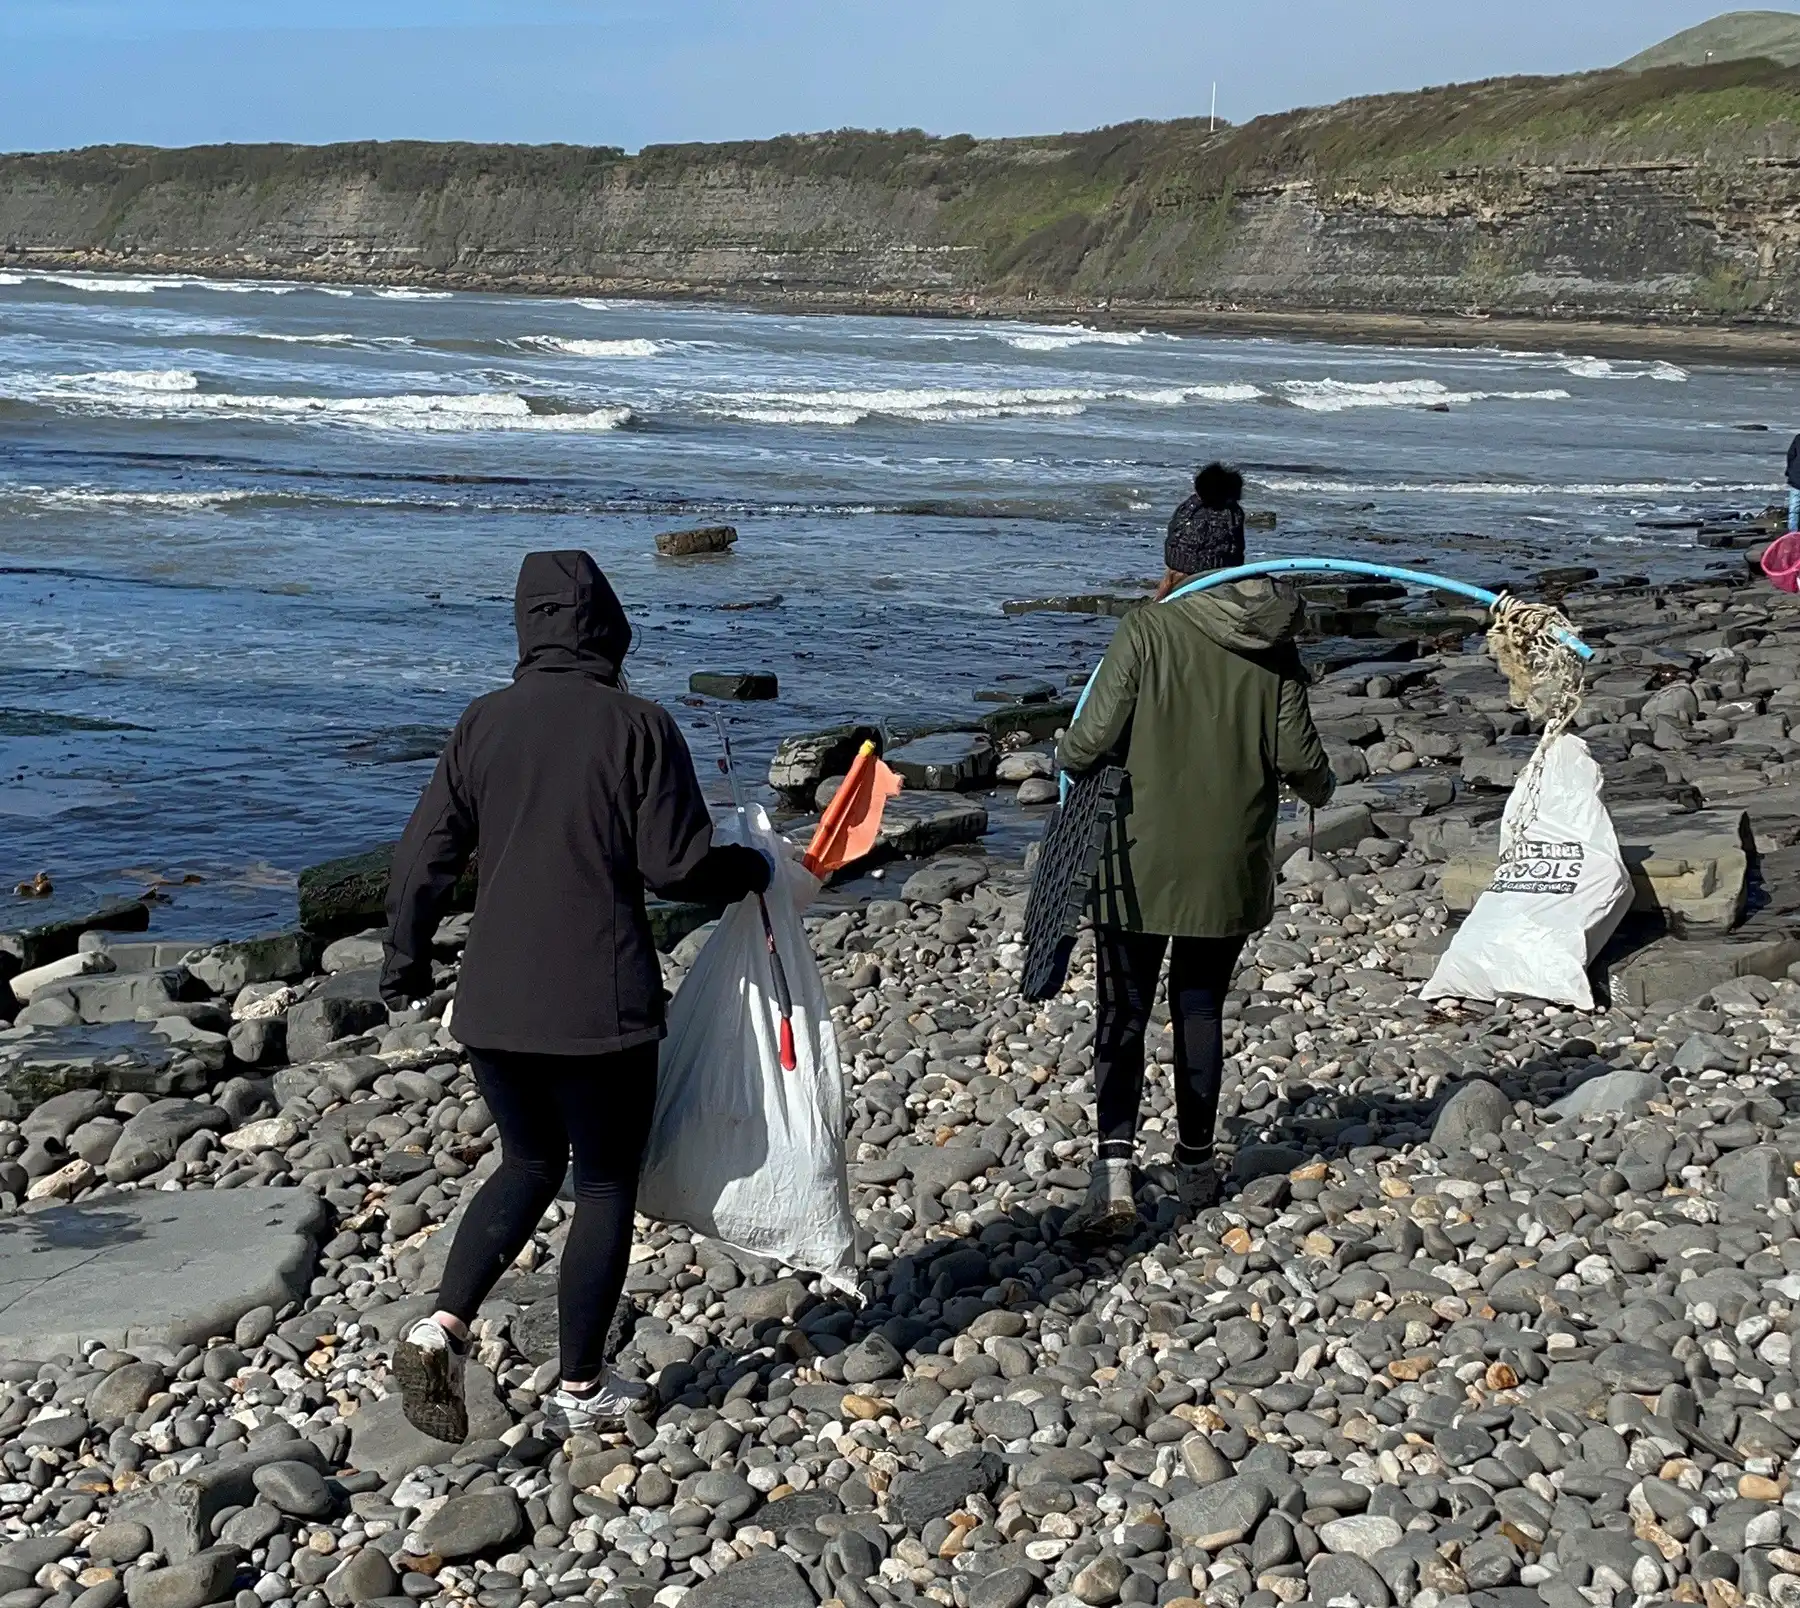 Hunting litter in beautiful surroundings during the Great Dorset Beach Clean